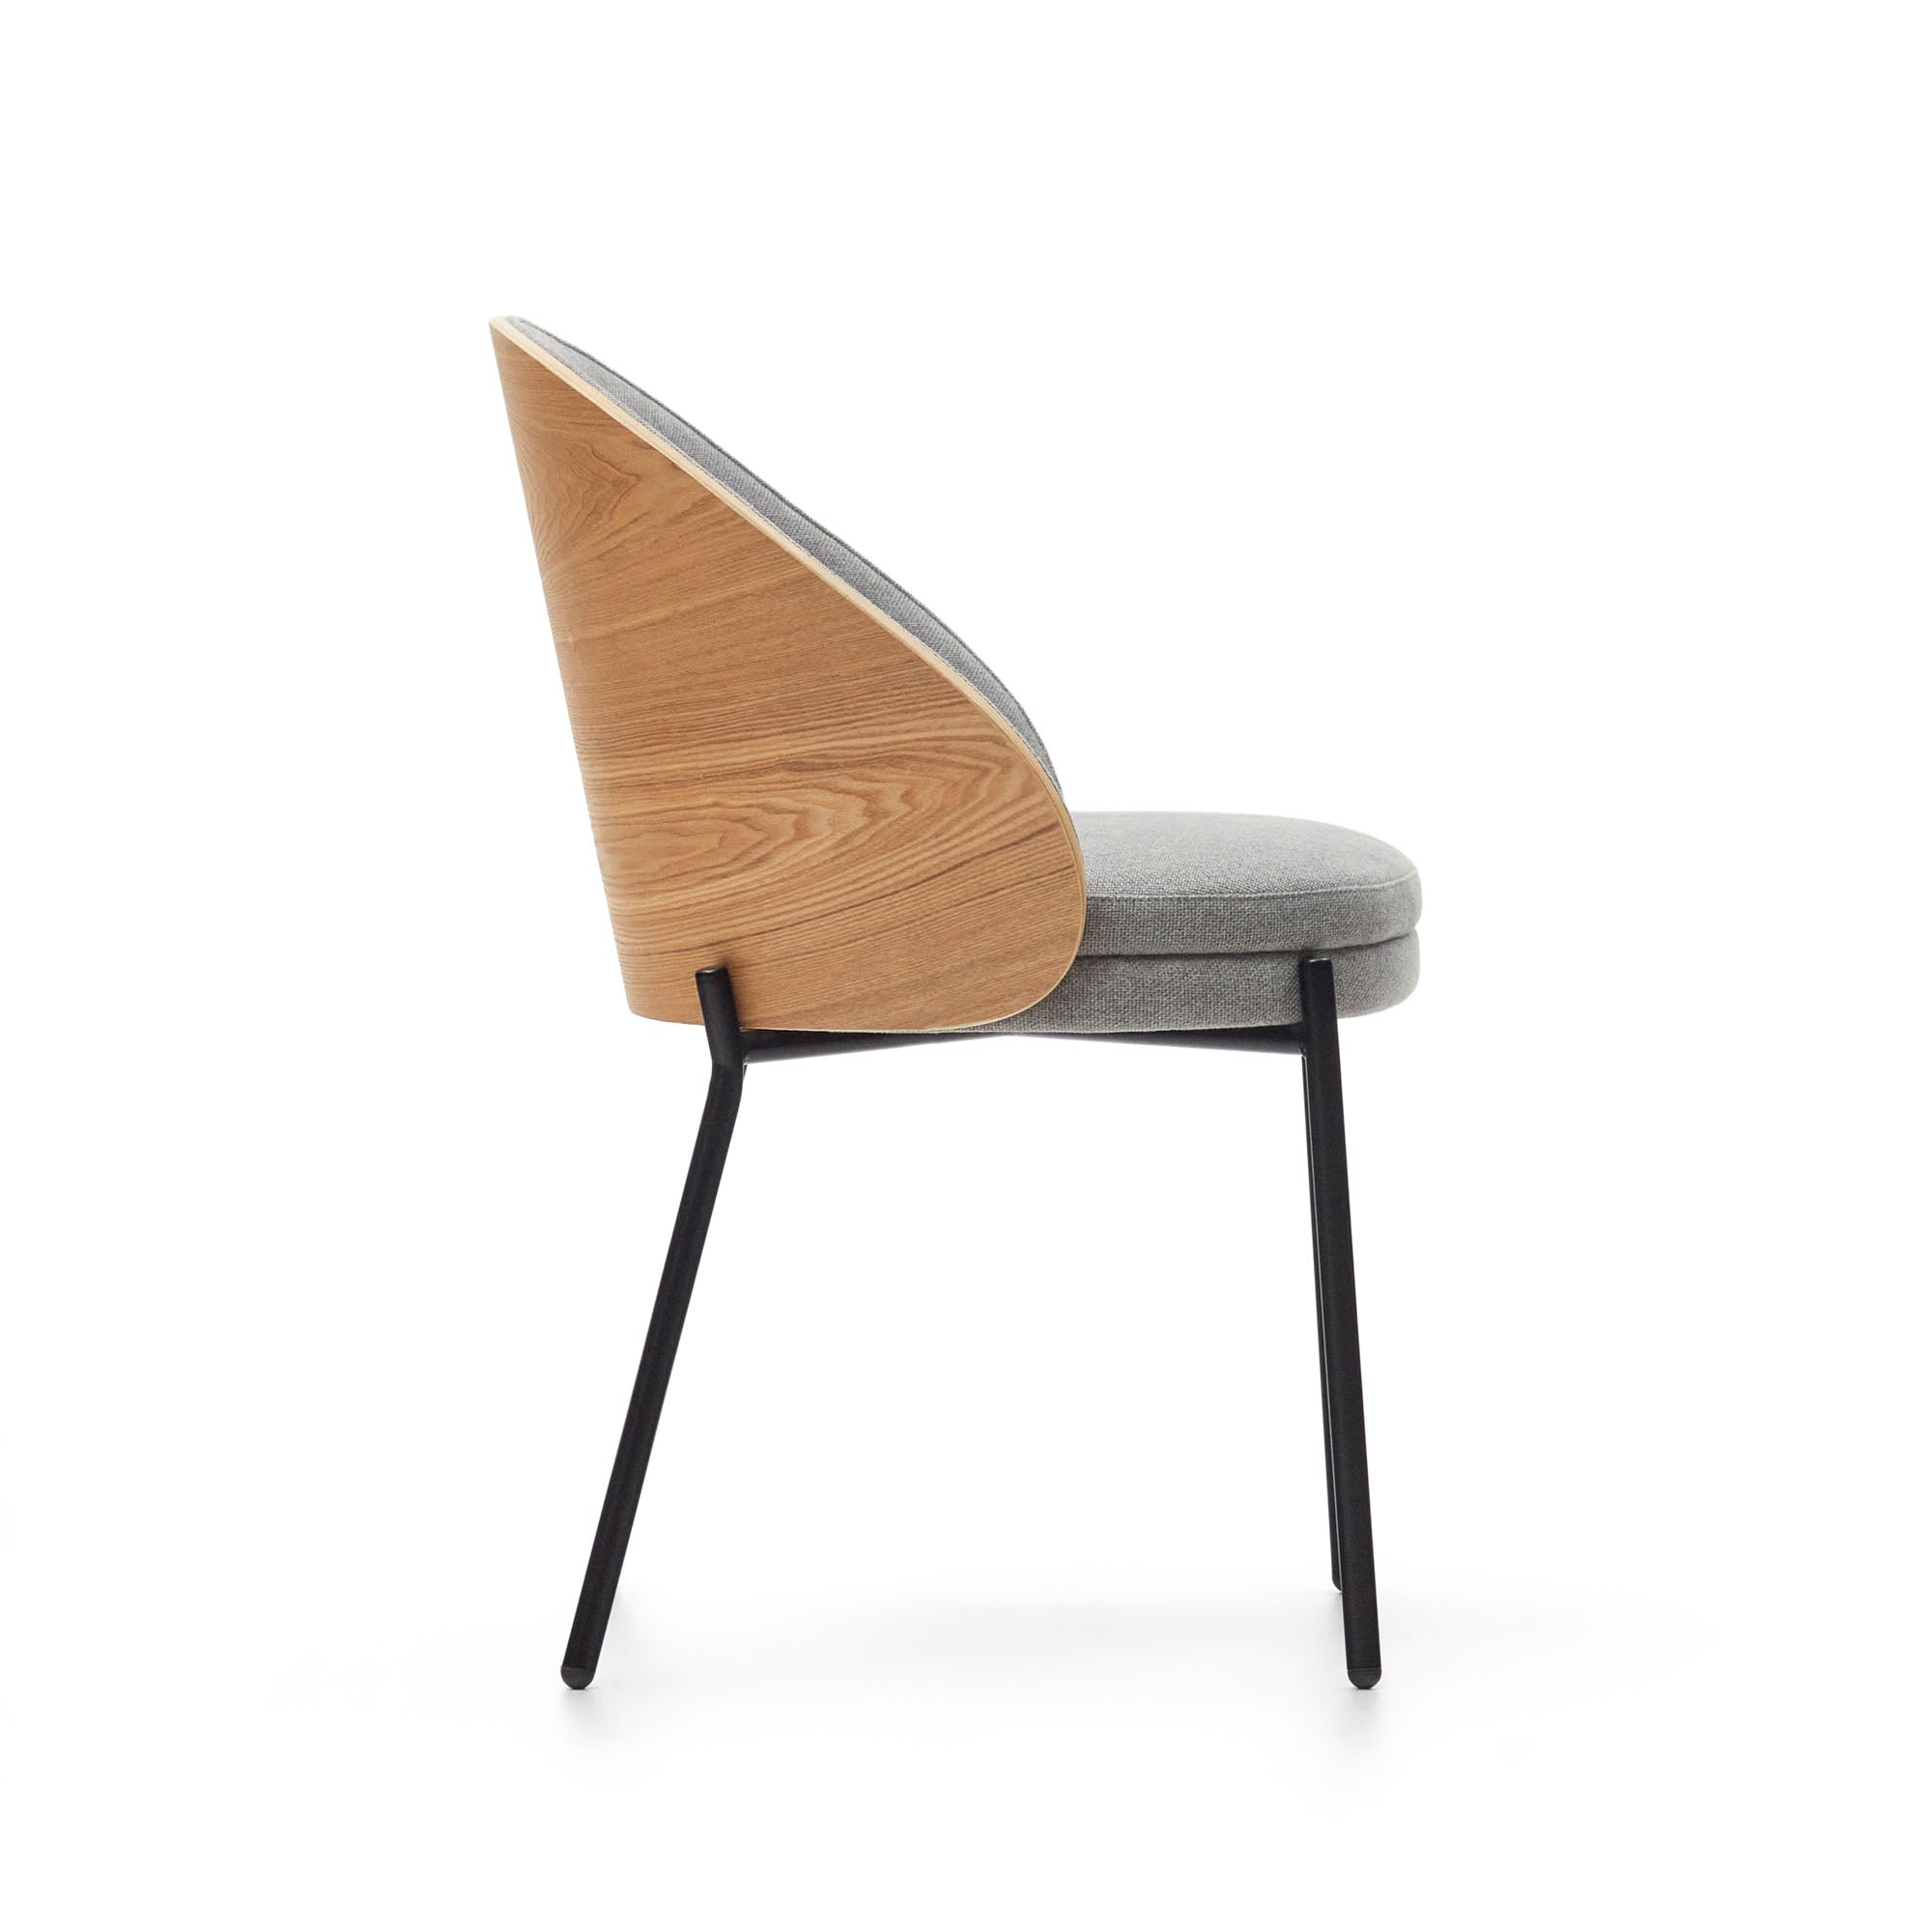 Eamy light grey chair in an ash wood veneer with a natural finish and black metal